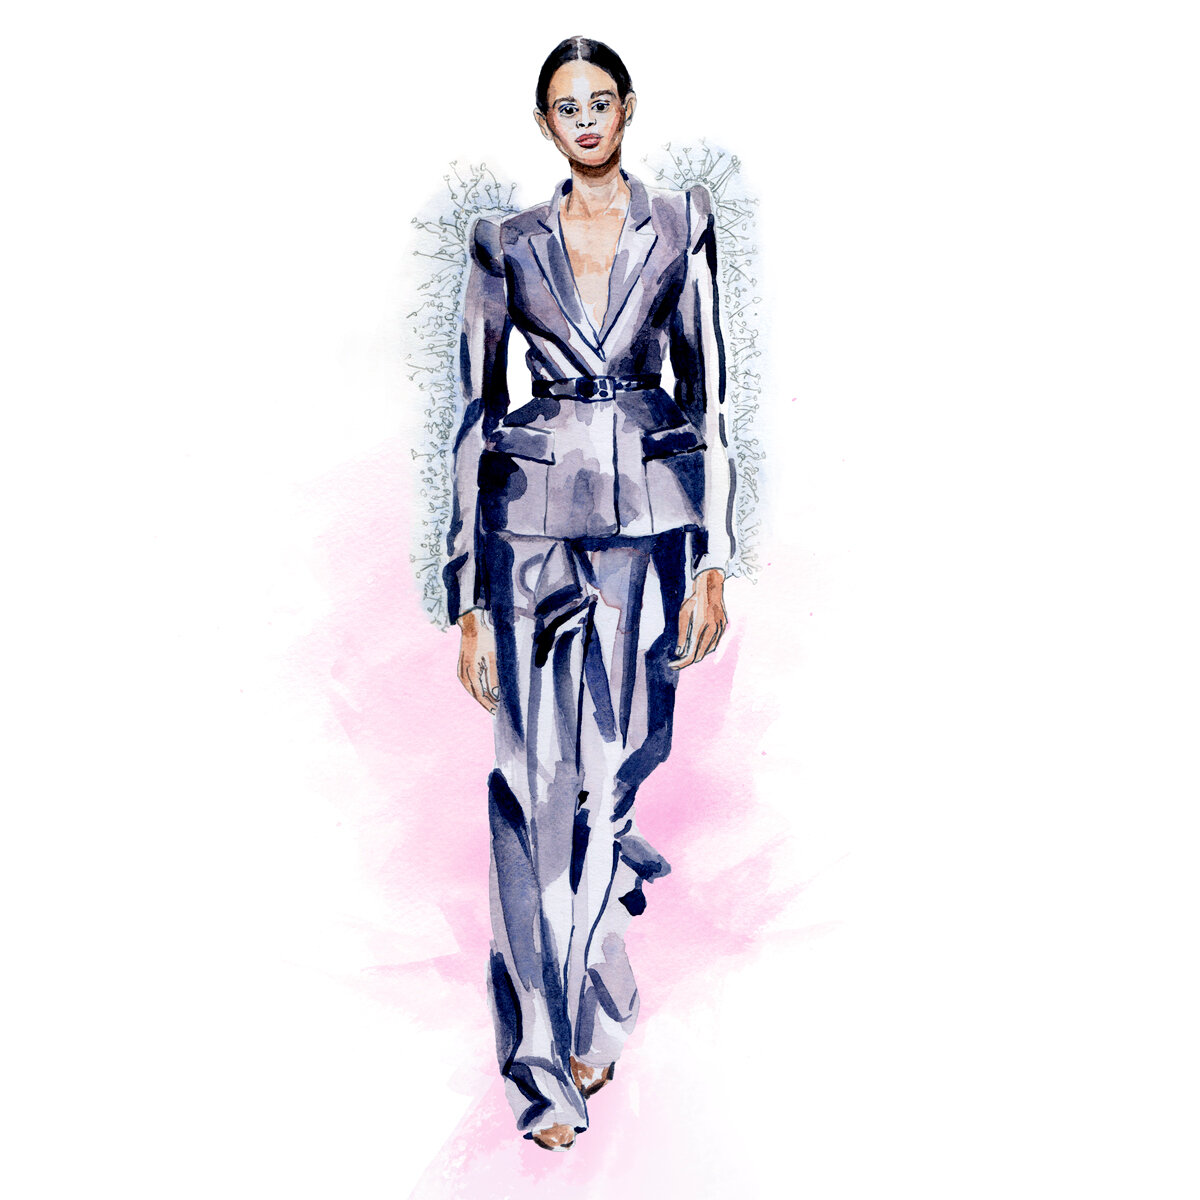 Givenchy_couture_2020_drawing_web_tux_02_RGB.jpg